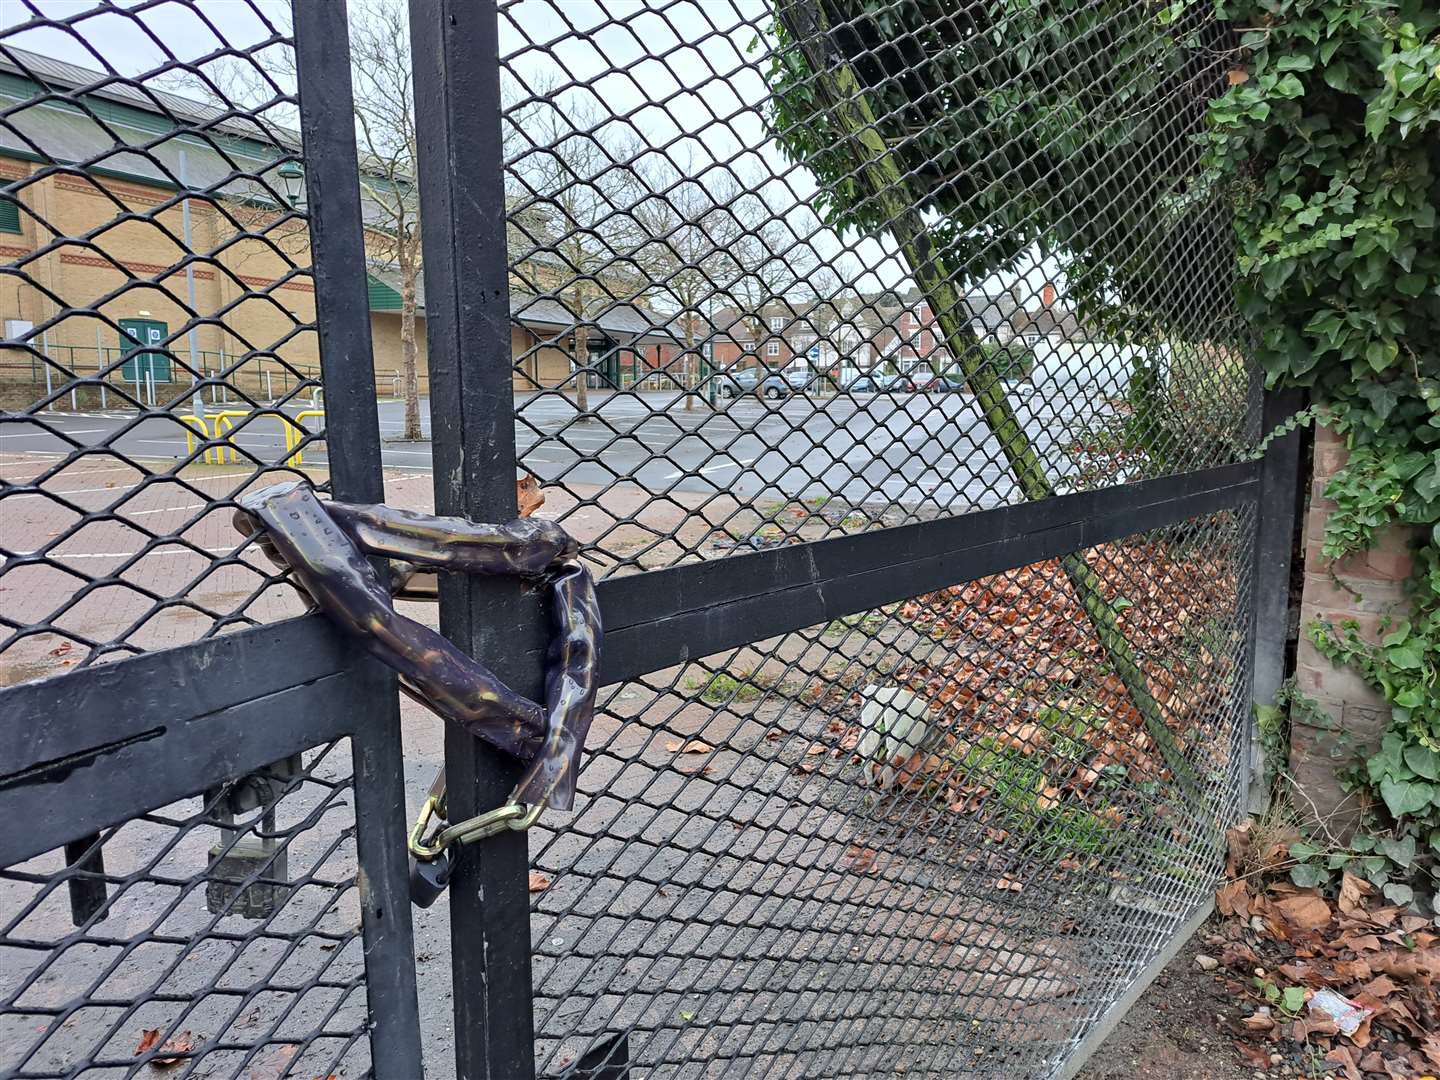 Residents were extremely frustrated to find the gate from Flood Lane, Faversham chained shut